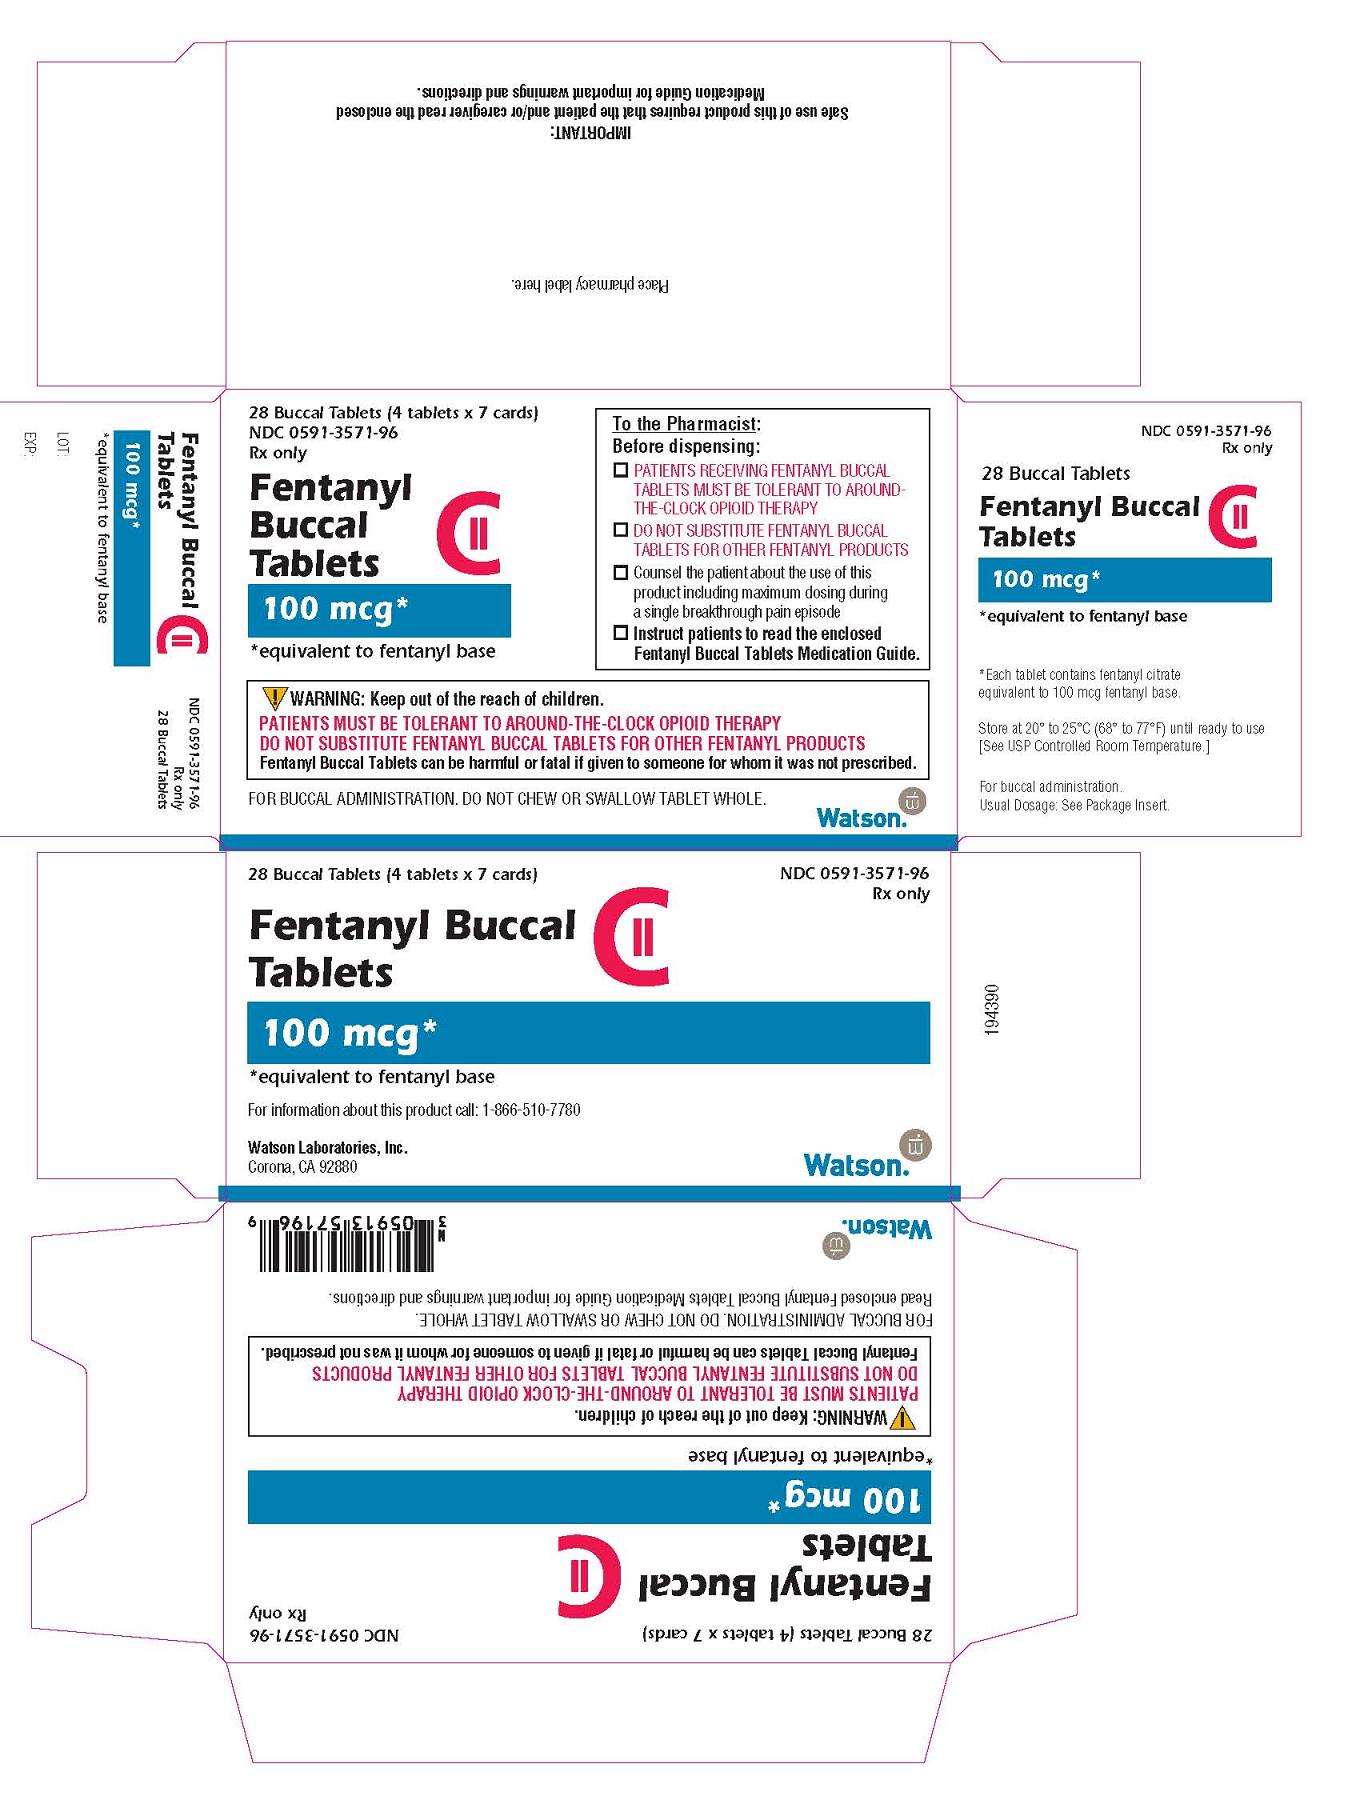 Fentanyl Buccal Tablets CII 100 mcg* *equivalent to fentanyl base